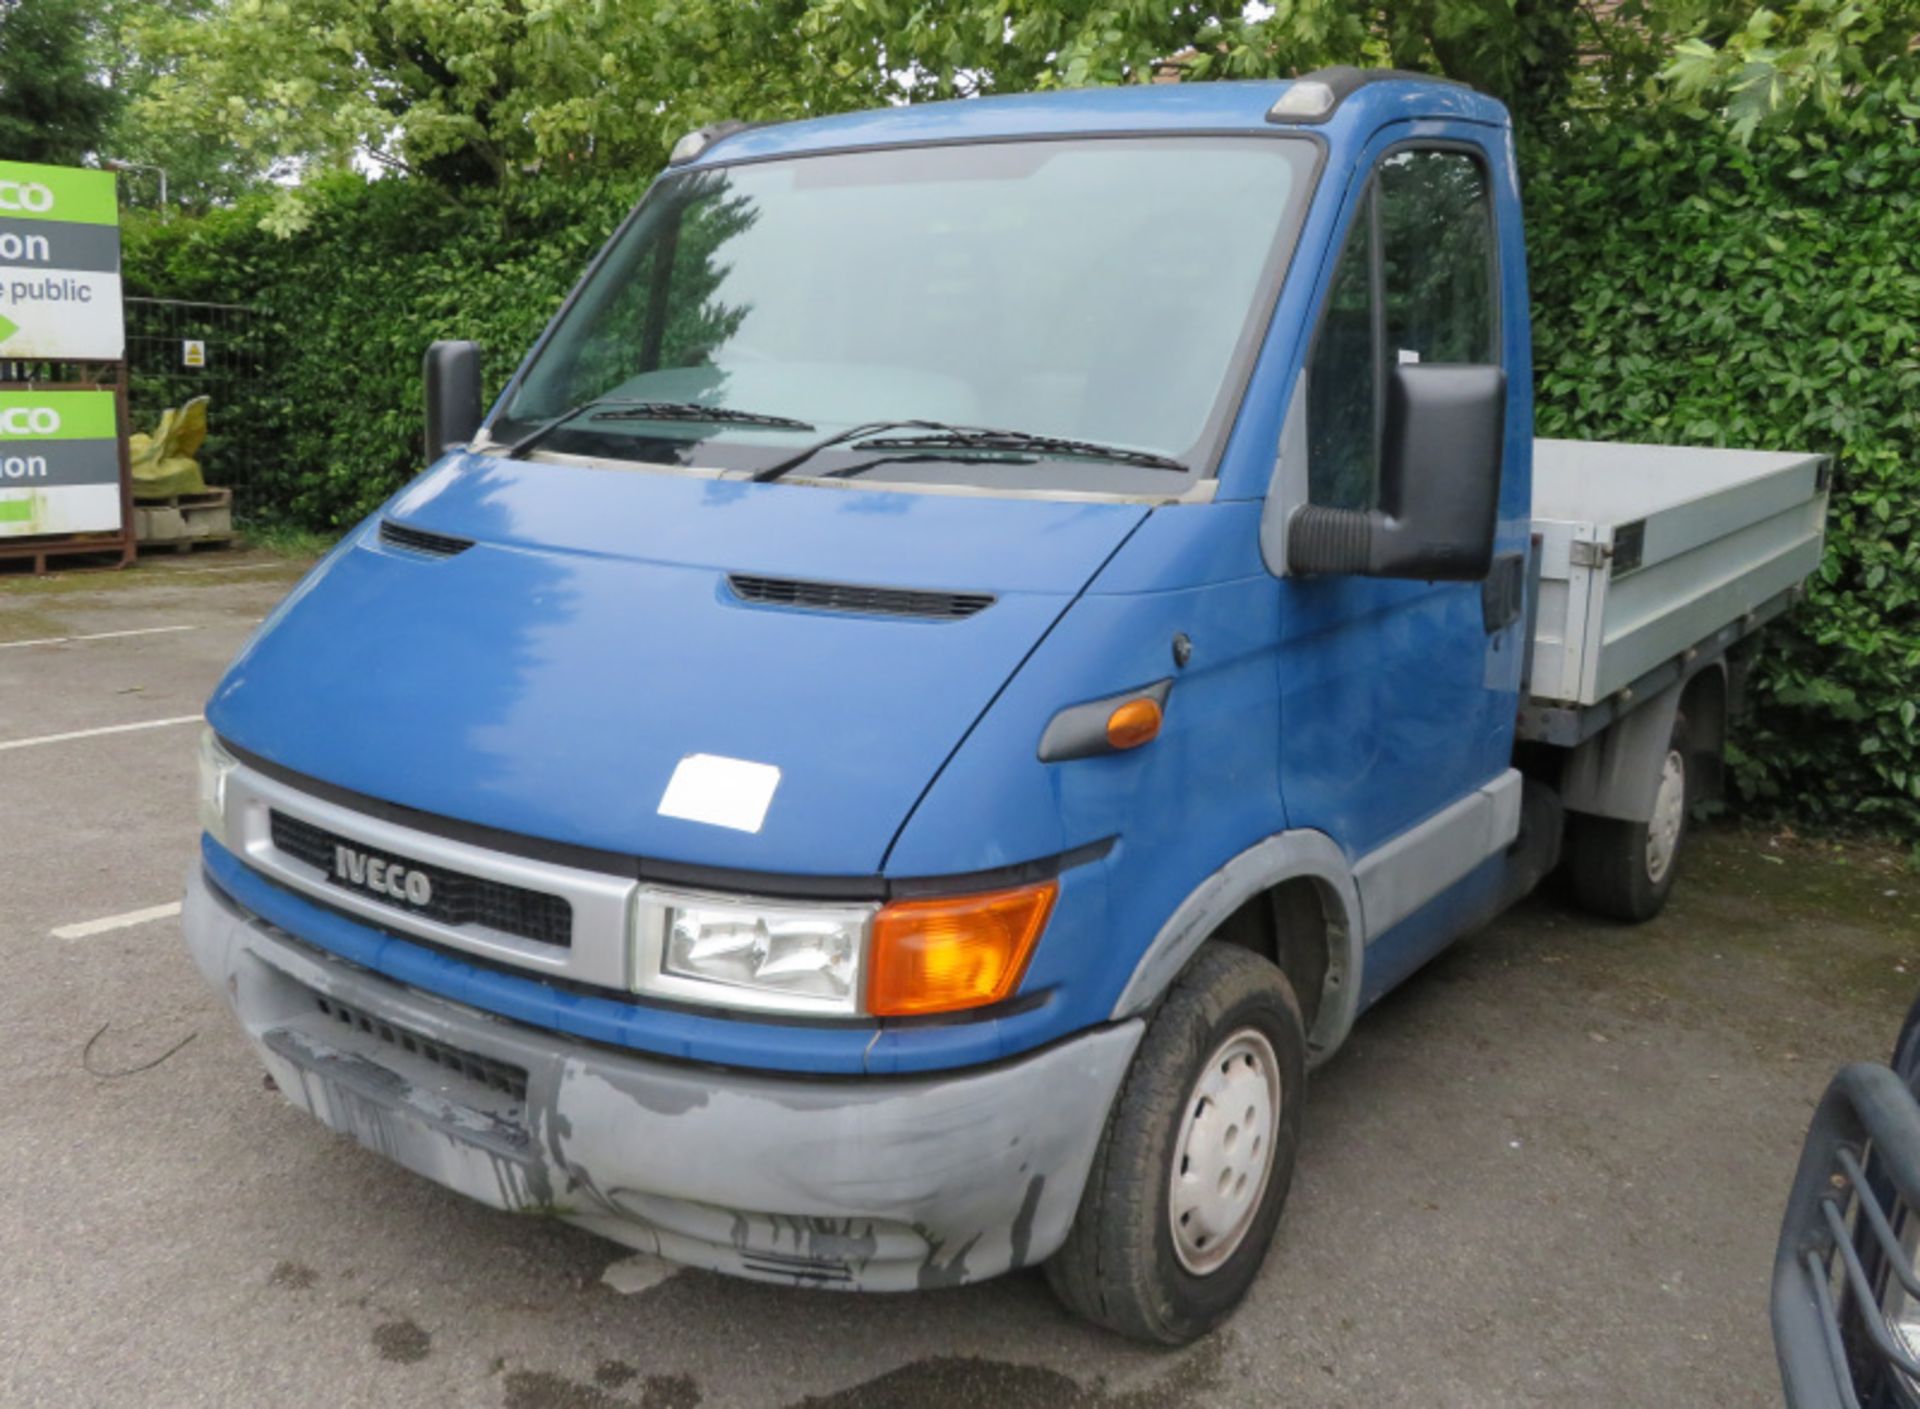 Iveco Daily drop side truck- 29L9 - diesel - year 2004 - 4 cylinder engine - Image 4 of 15